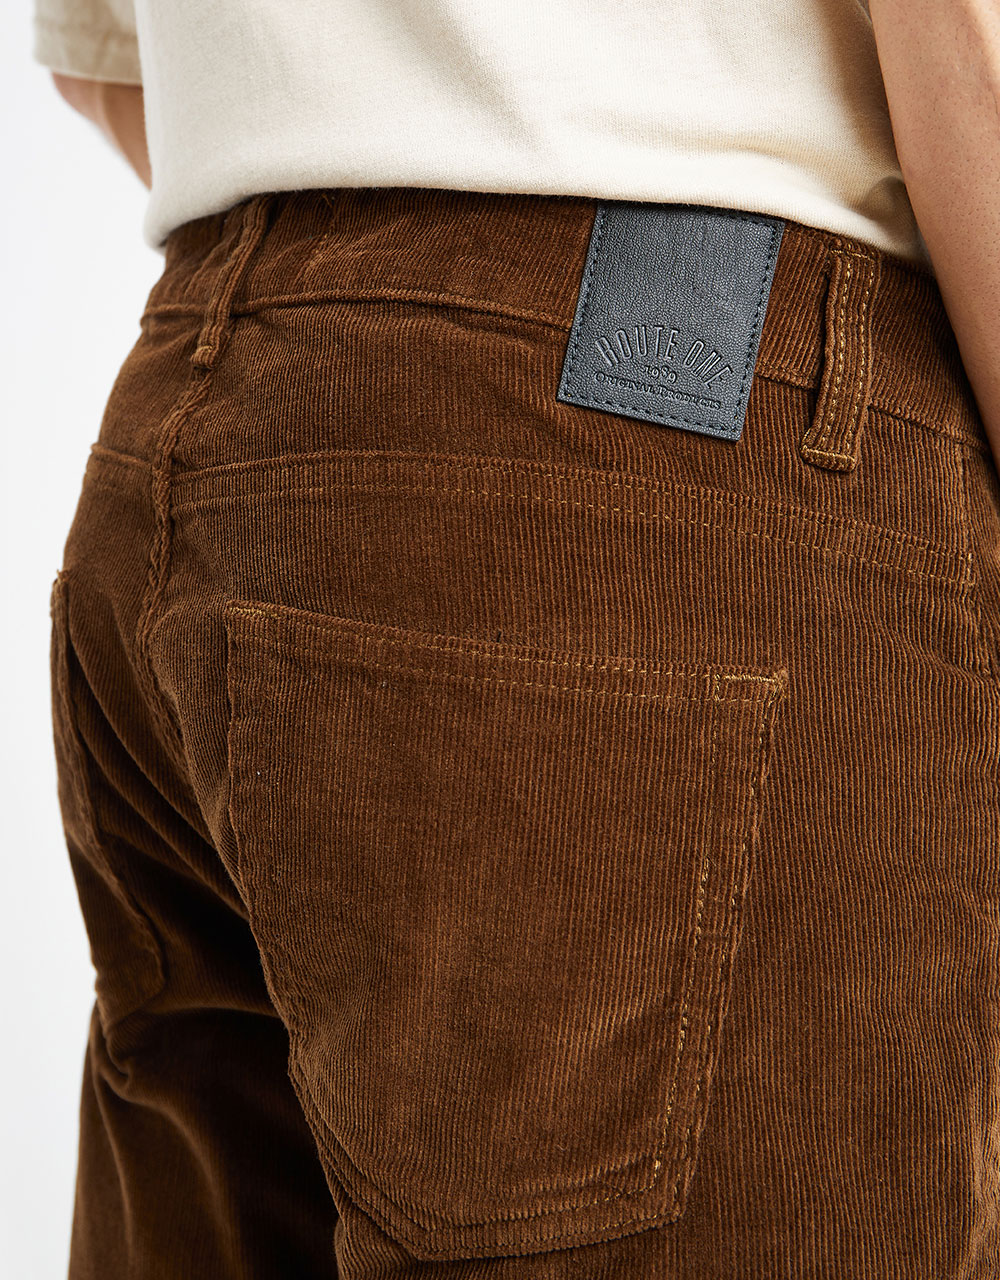 Route One Slim Fit Cords - Chocolate